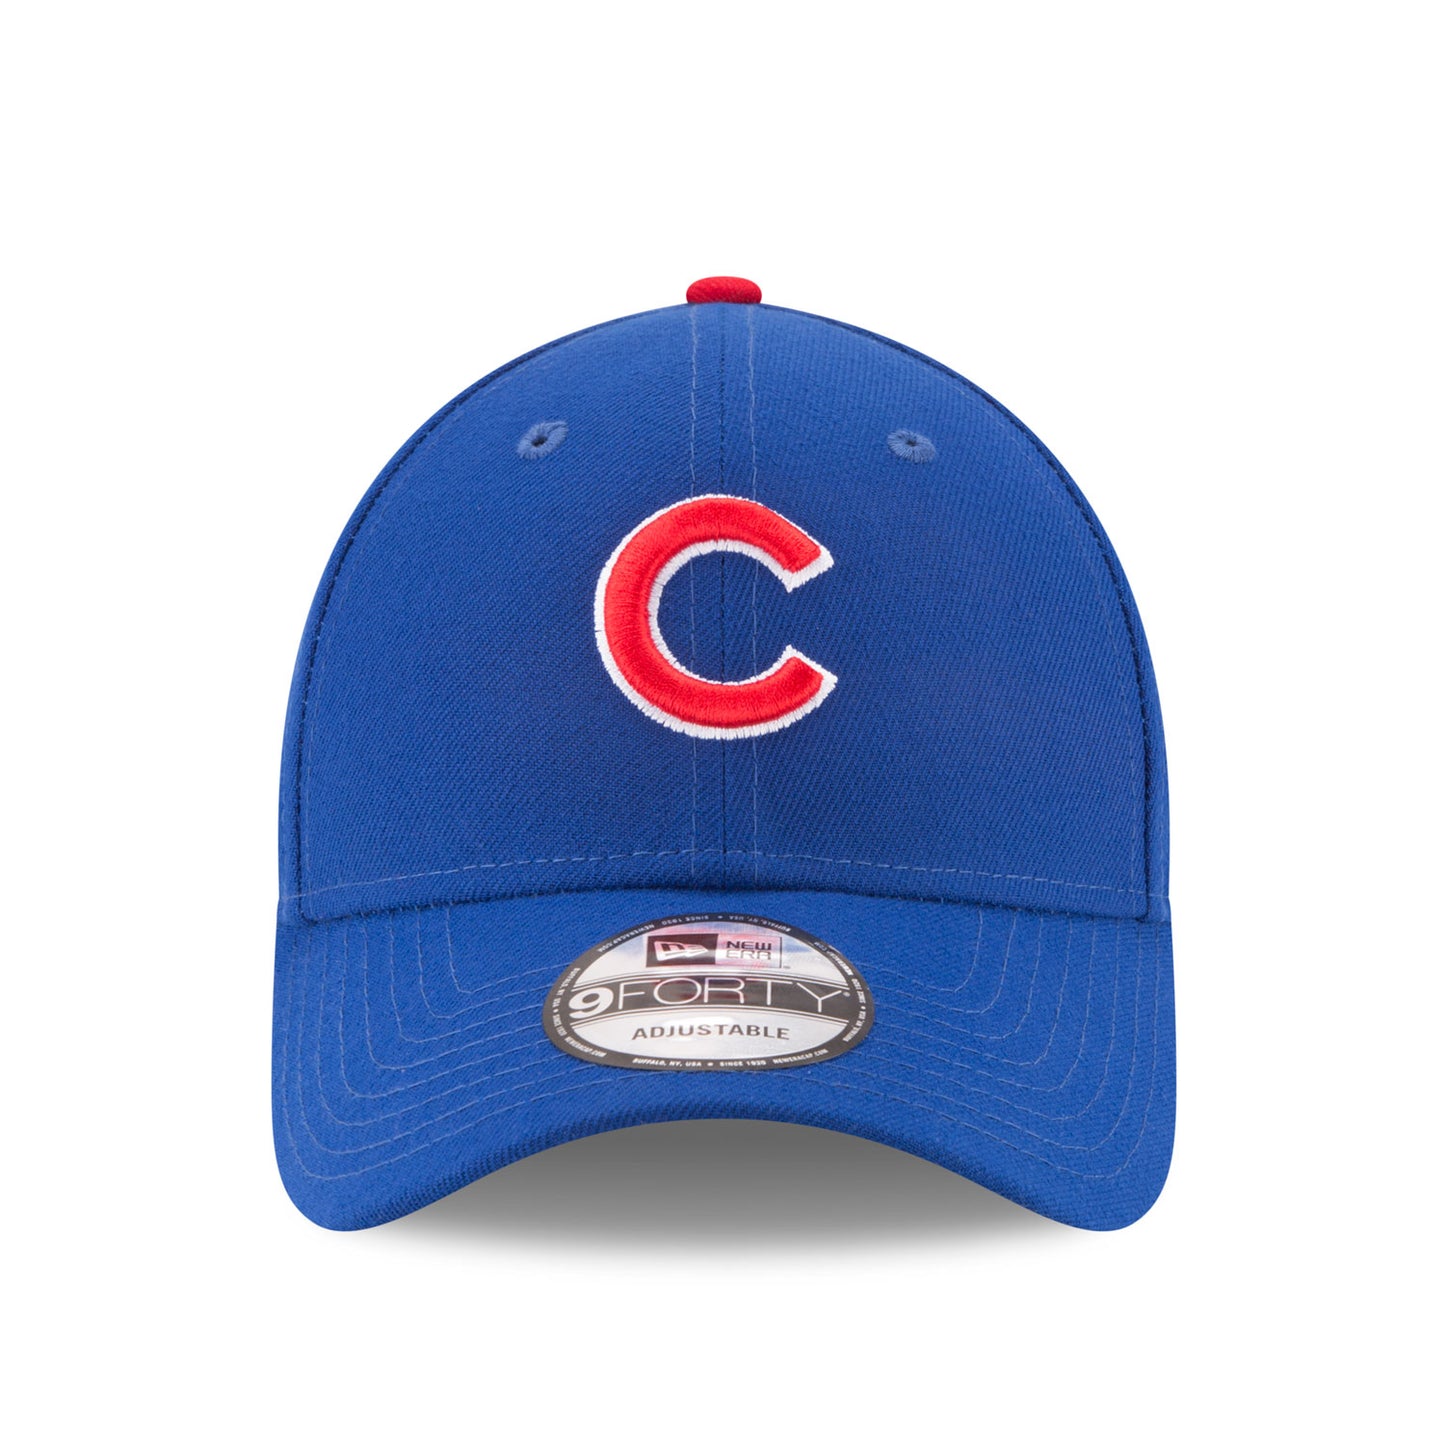 THE LEAGUE Chicago Cubs 9FORTY New Era Cap